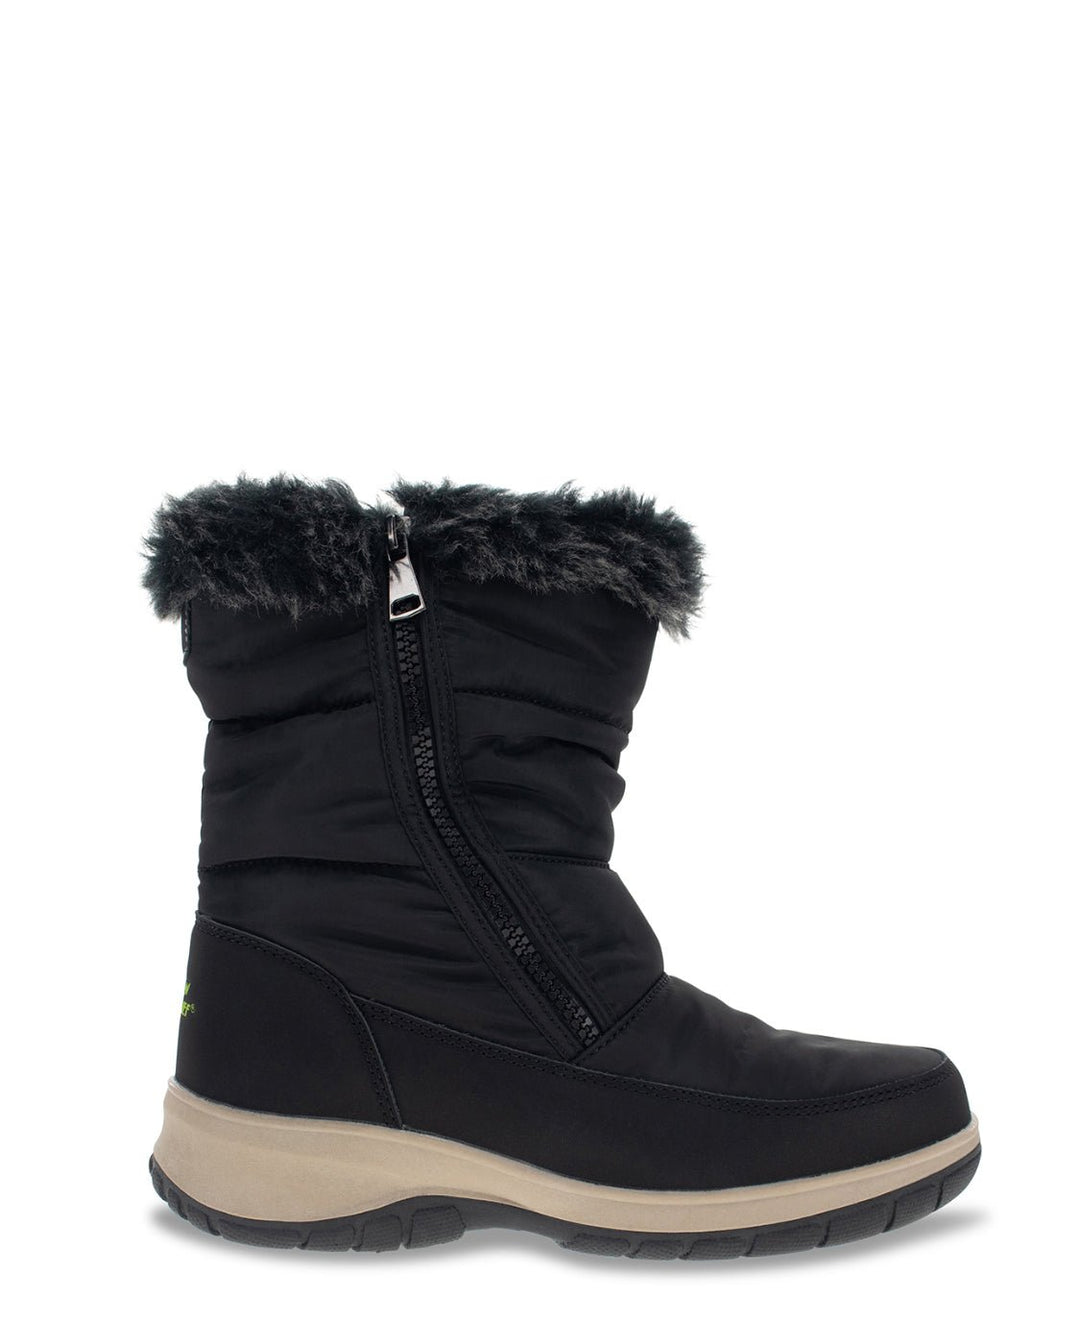 Women's Pine Cold Weather Boot - Black - Western Chief